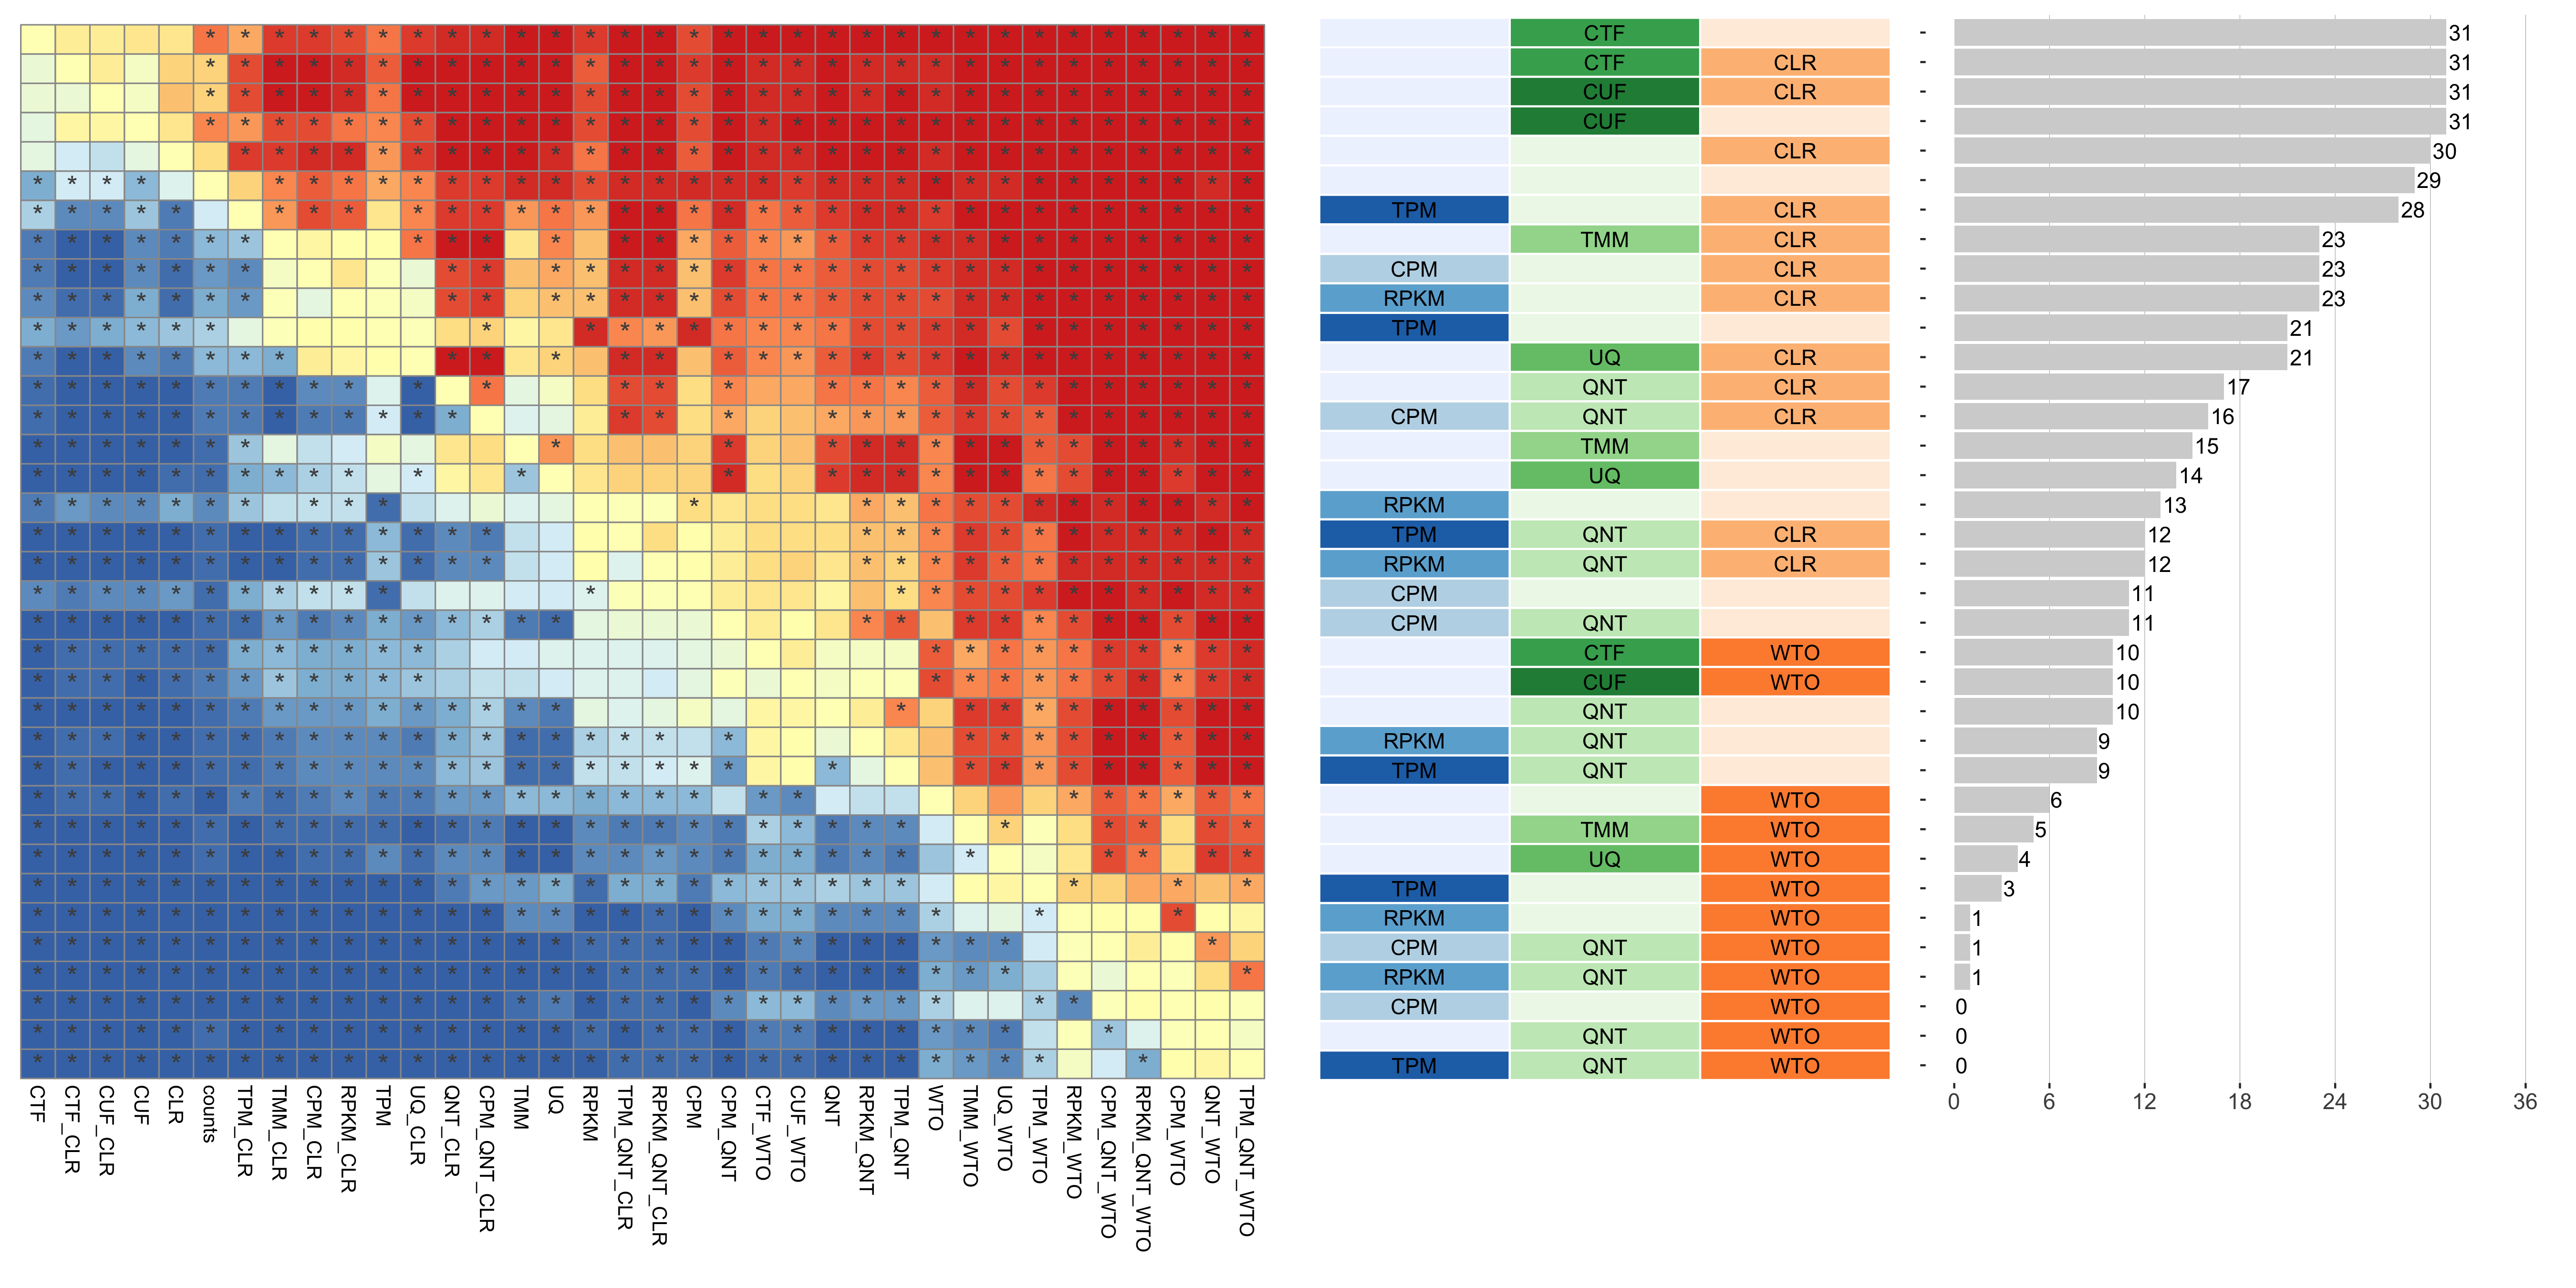 **Dataset-level pairwise comparison of workflow performance.** (**left**) The heatmap shows the relative performance of a pair of workflows, corresponding to a row and a column, directly compared to each other for the GTEx datasets based on the tissue-naive gold standard. The color in each cell (row, column) represents the proportion of datasets for which the workflow along the row has a higher log2(auPRC/prior) than the workflow along the column. Comparisons that are statistically significant (corrected p < 0.01) based on a paired Wilcoxon test are marked with an asterisk. (**middle**) The workflows (rows) are described in terms of the specific method used in the within-sample normalization (blues), between-sample normalization (greens), and network transformation (oranges) stages. (**right**) The barplot shows the number of times each workflow was significantly greater than another workflow.